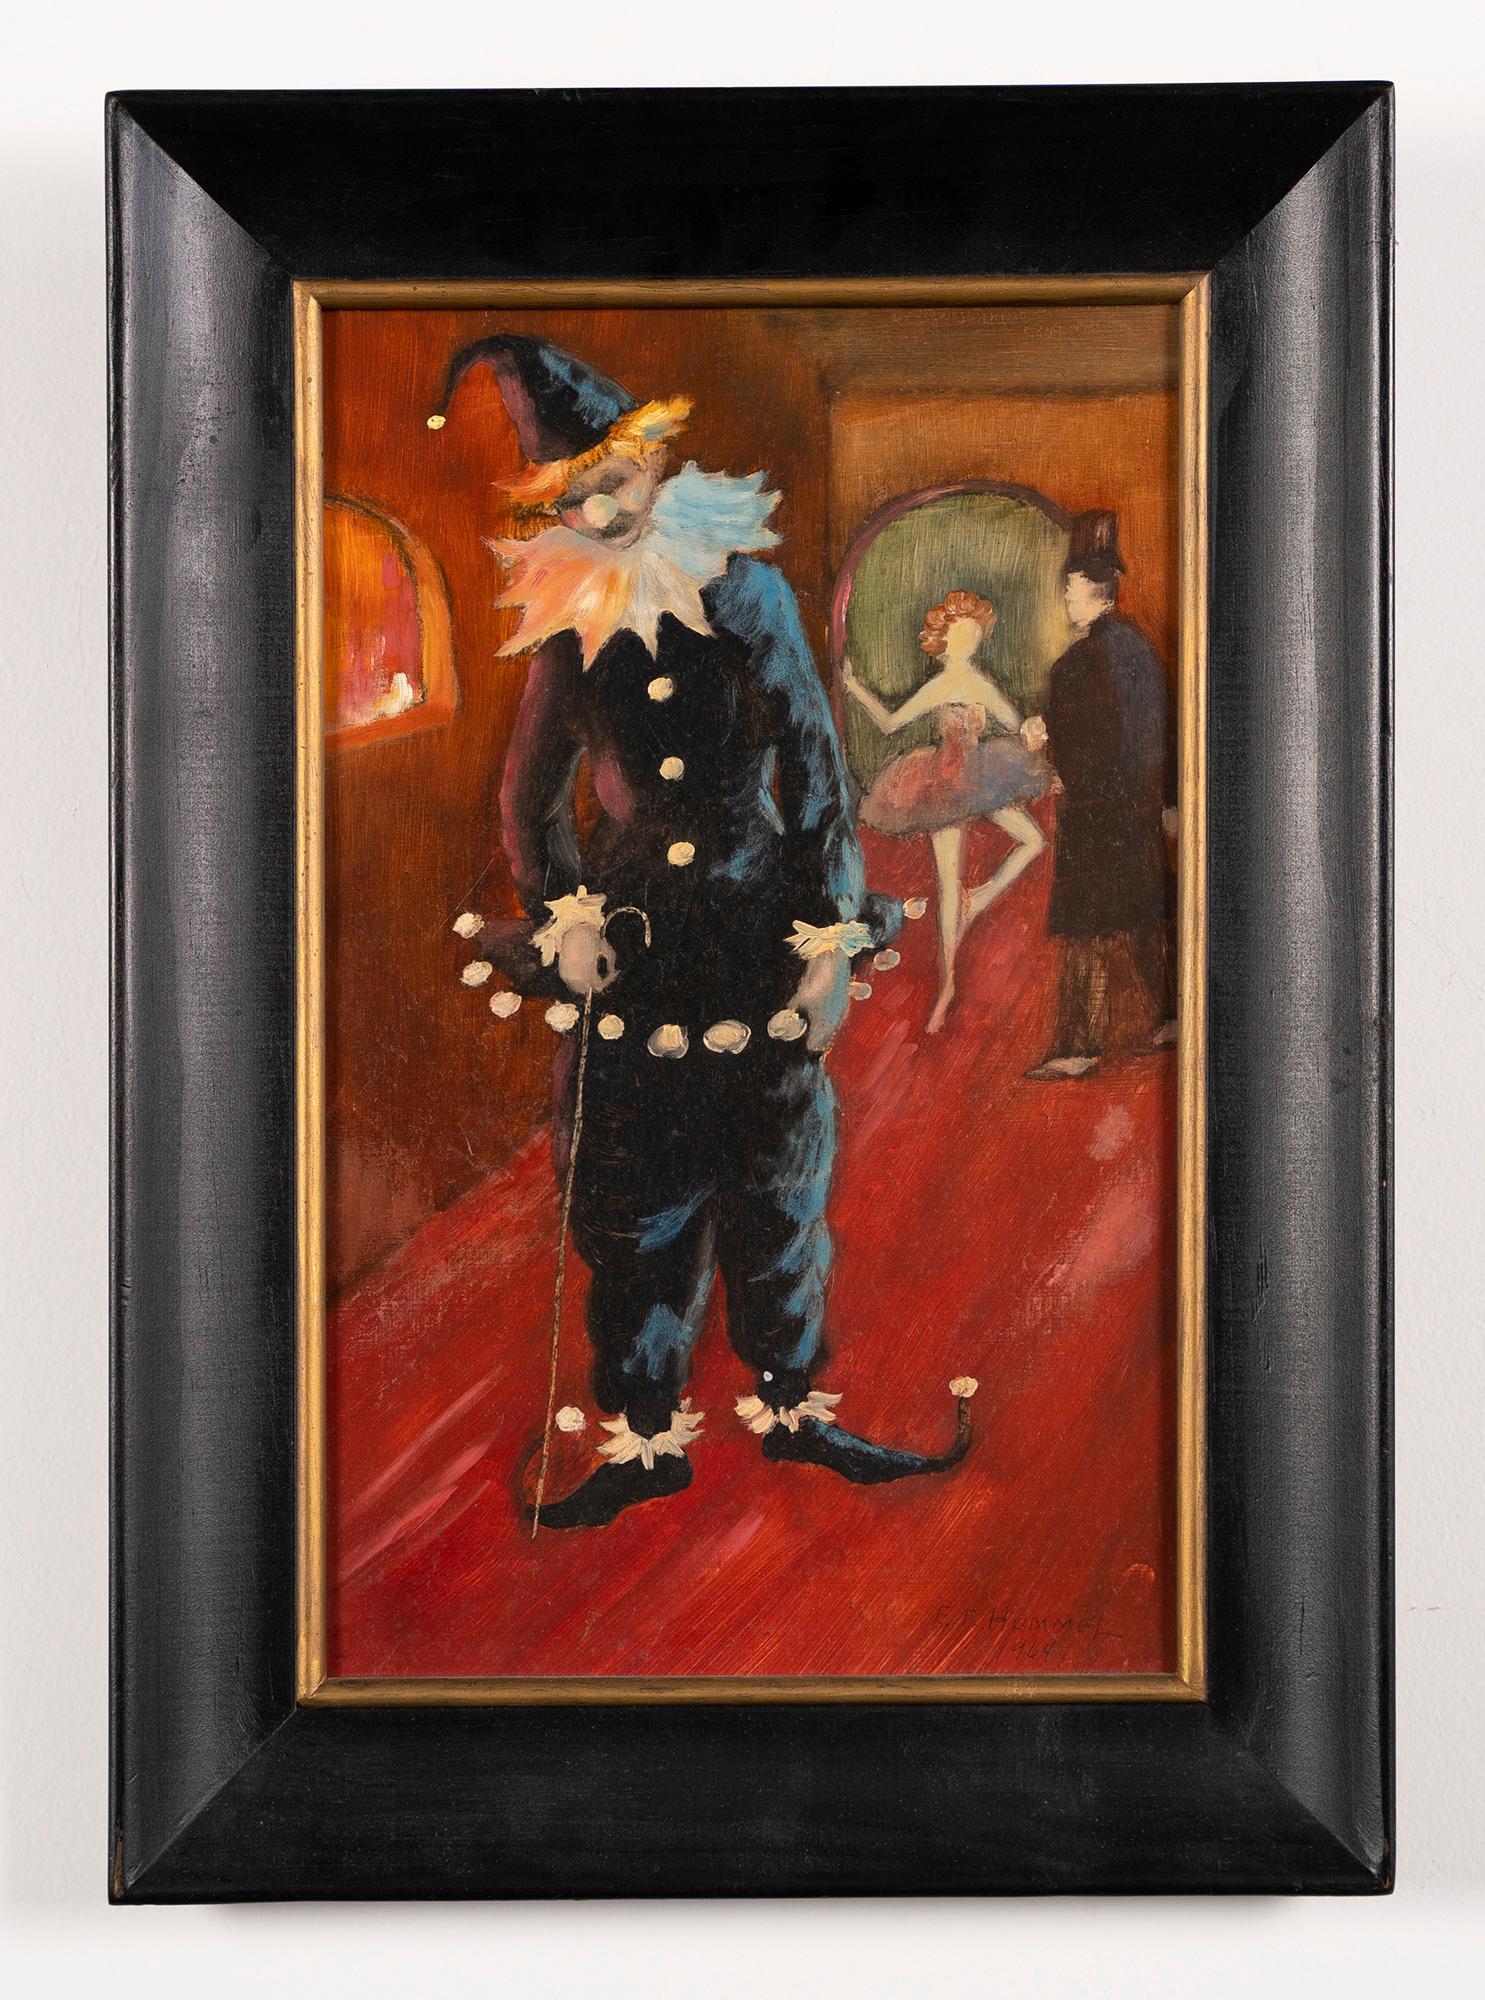 Vintage American modernist interior painting of sad clown.  Oil on board, circa 1964.  Signed lower right.  Image size, 8.5L x 13.5H.  Framing available